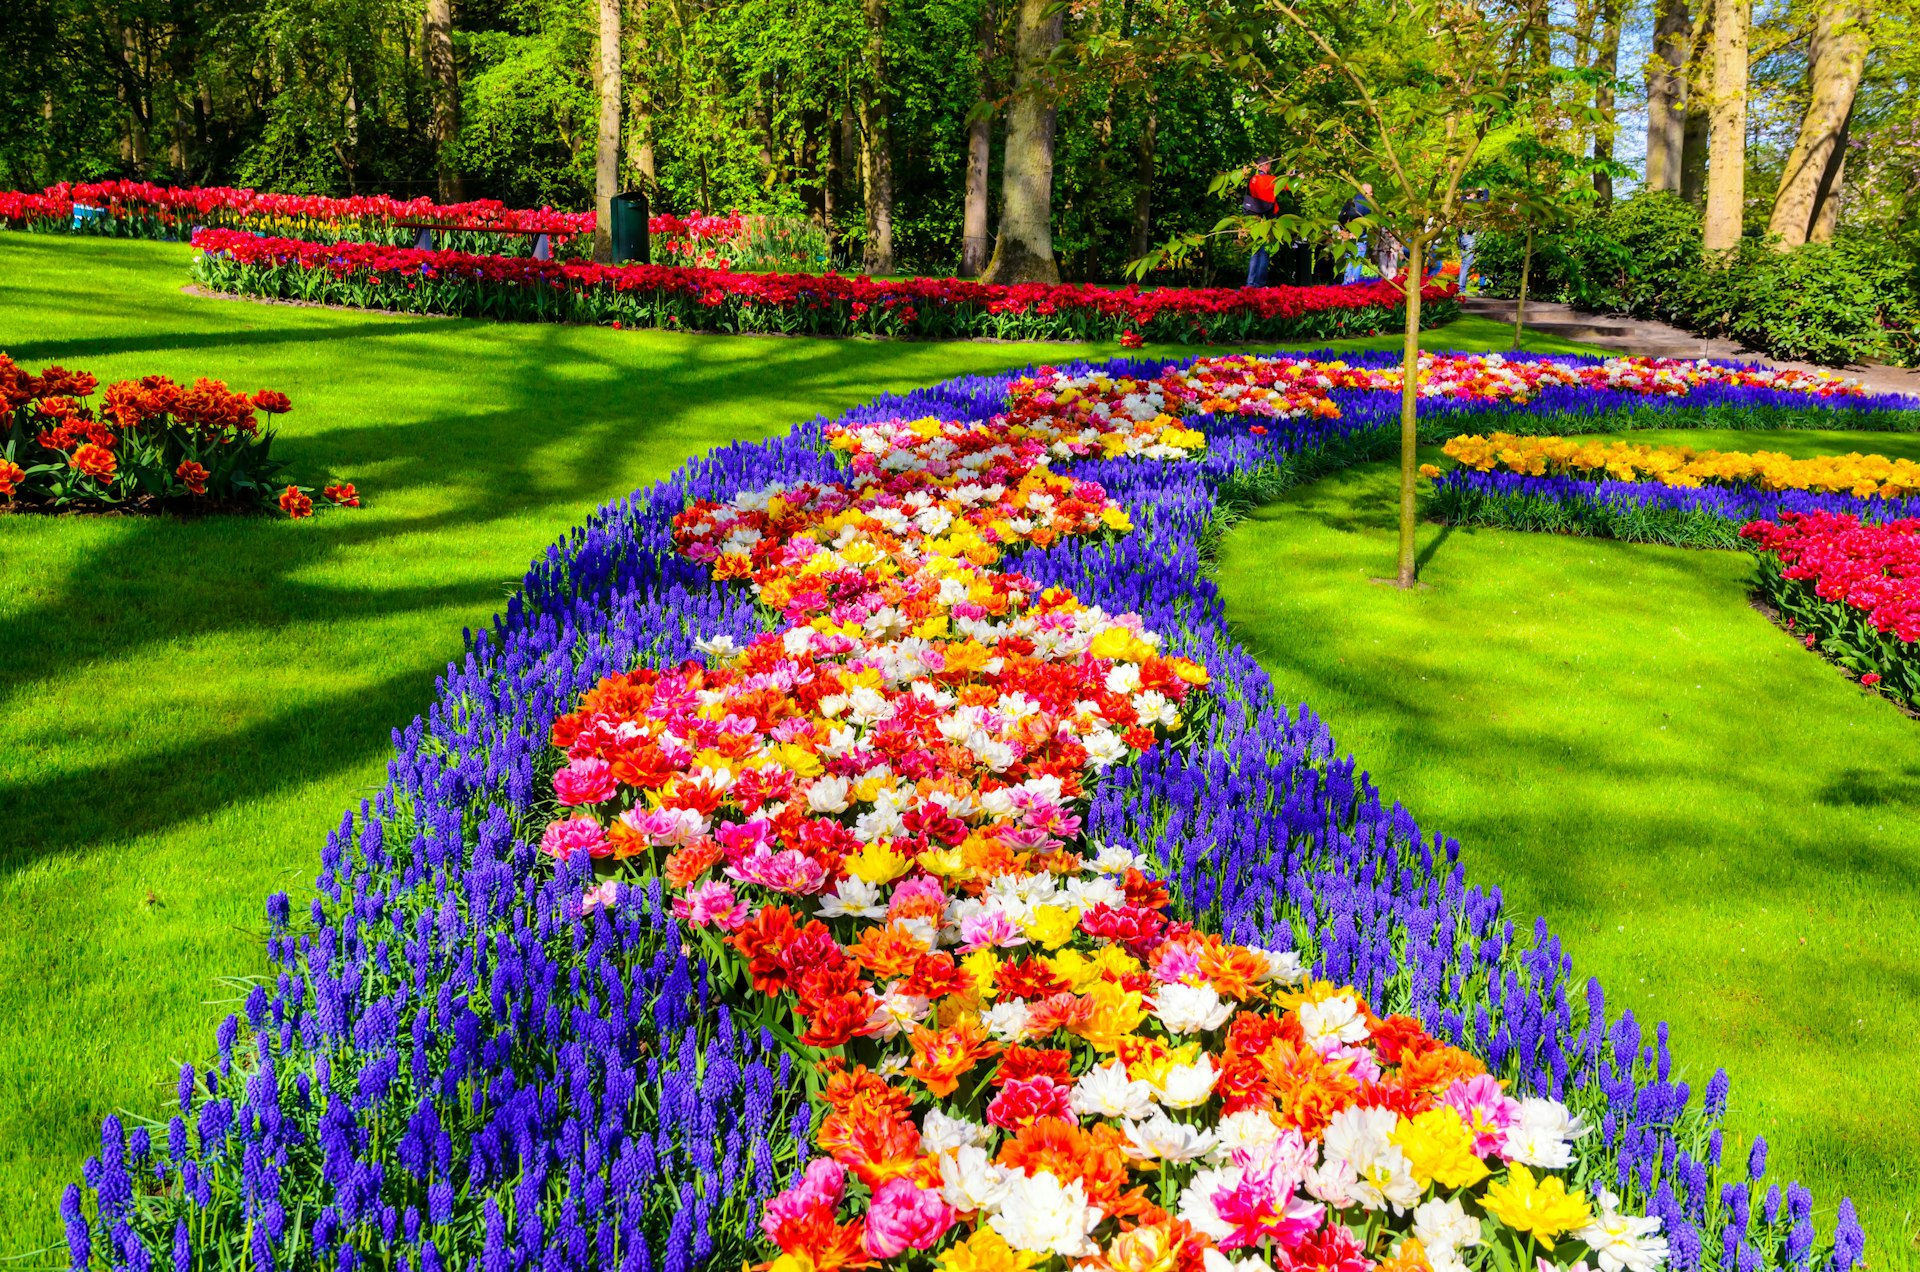 A row of tulips in bloom with blues, reds and yellows, planted in a pattern